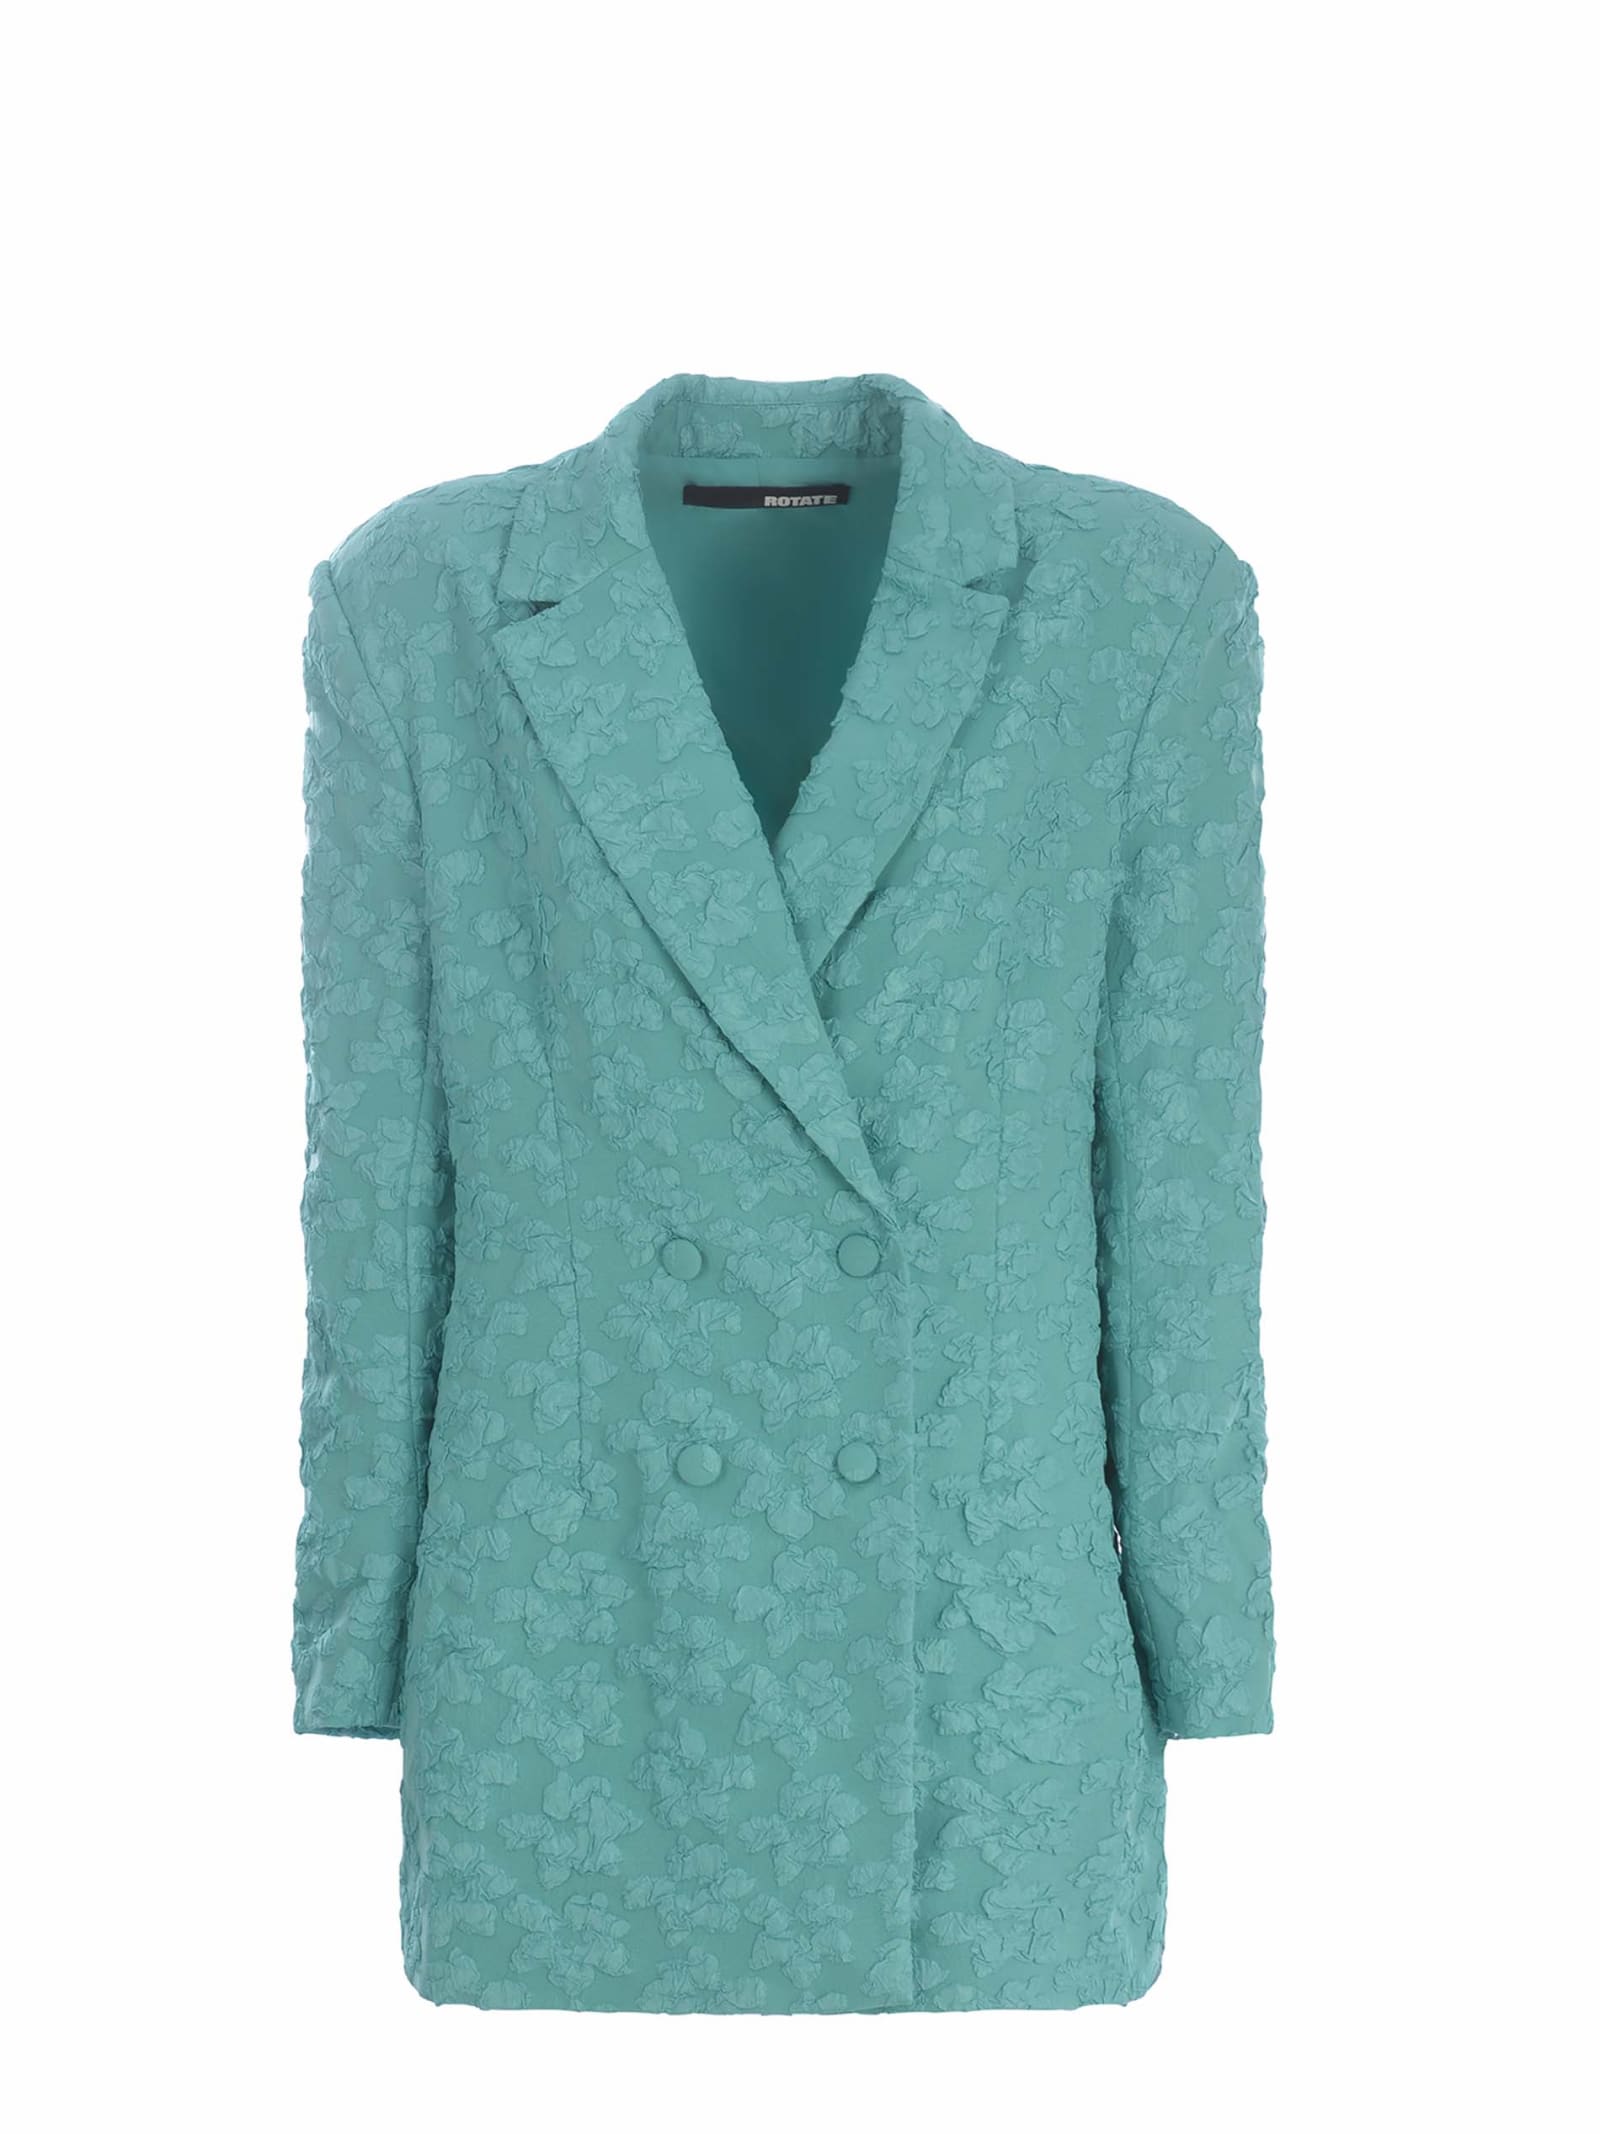 Shop Rotate Birger Christensen Jacket Dress Rotate Made Of 3d Jacquard In Turchese